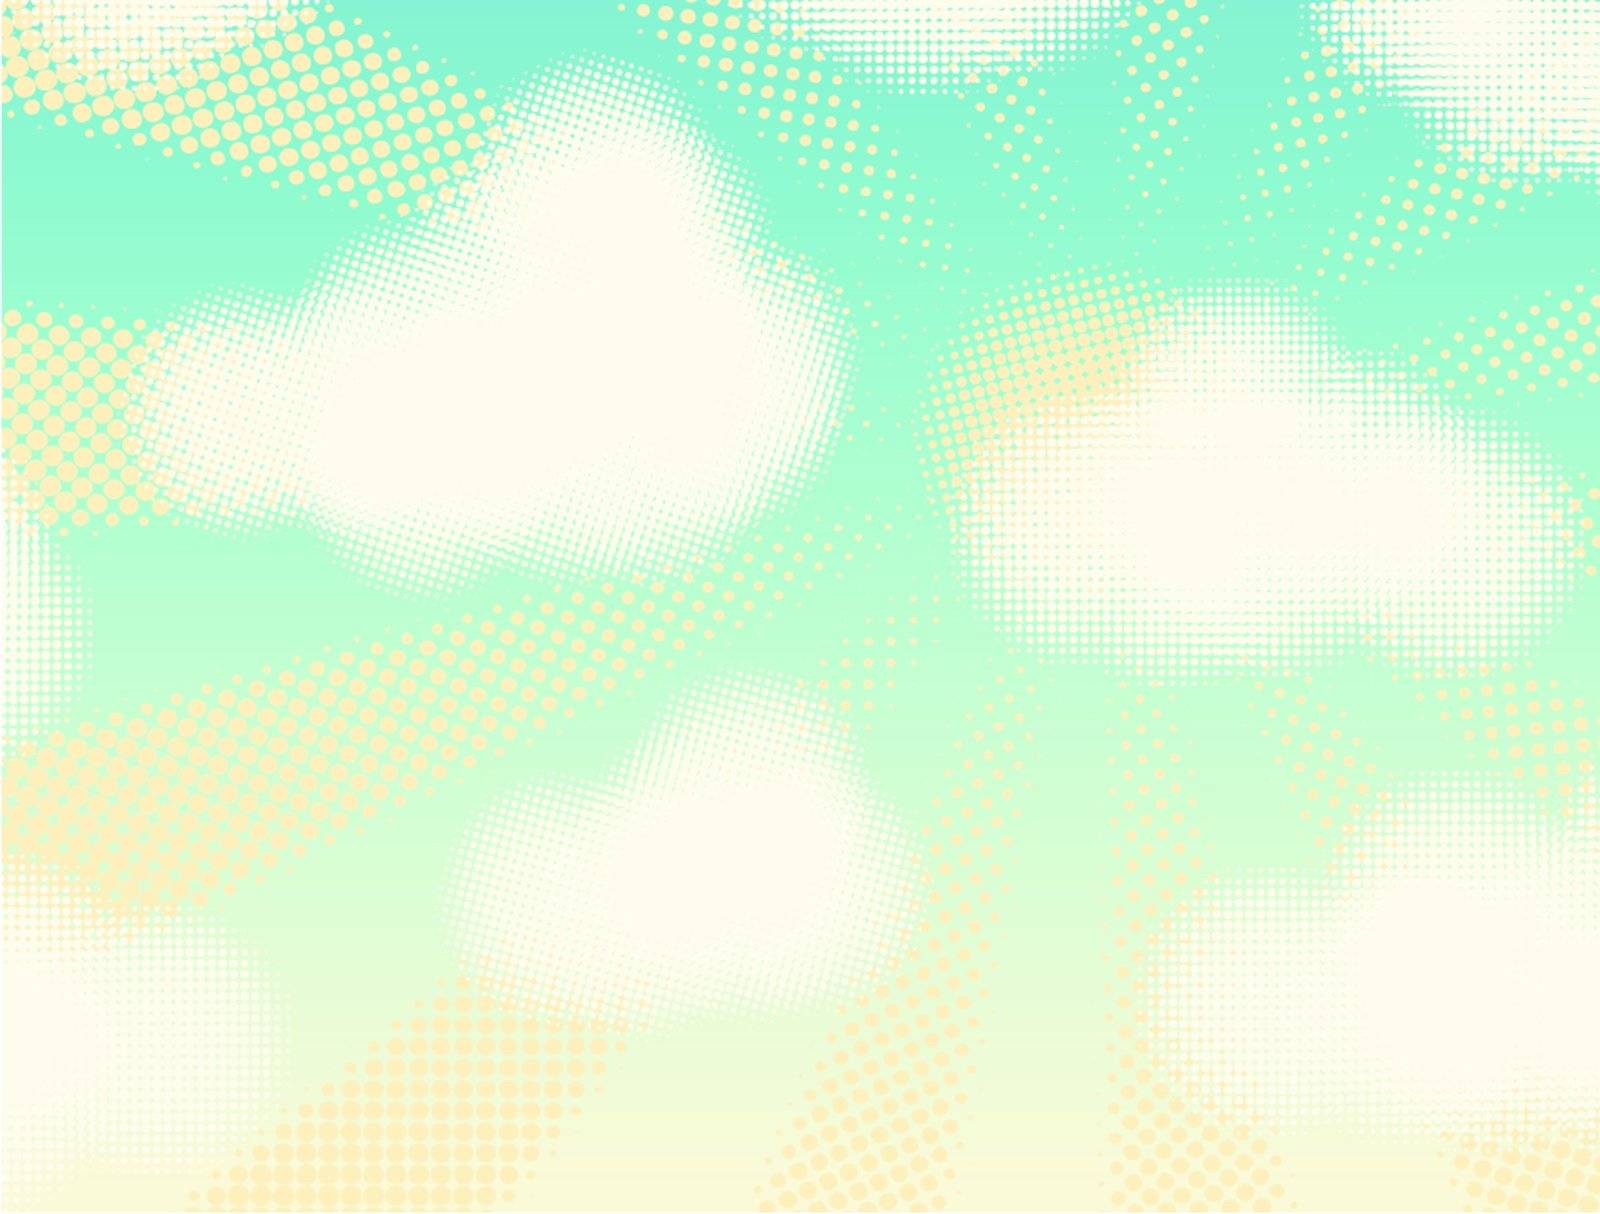 Editable vector design of halftone cumulus clouds and sunshine